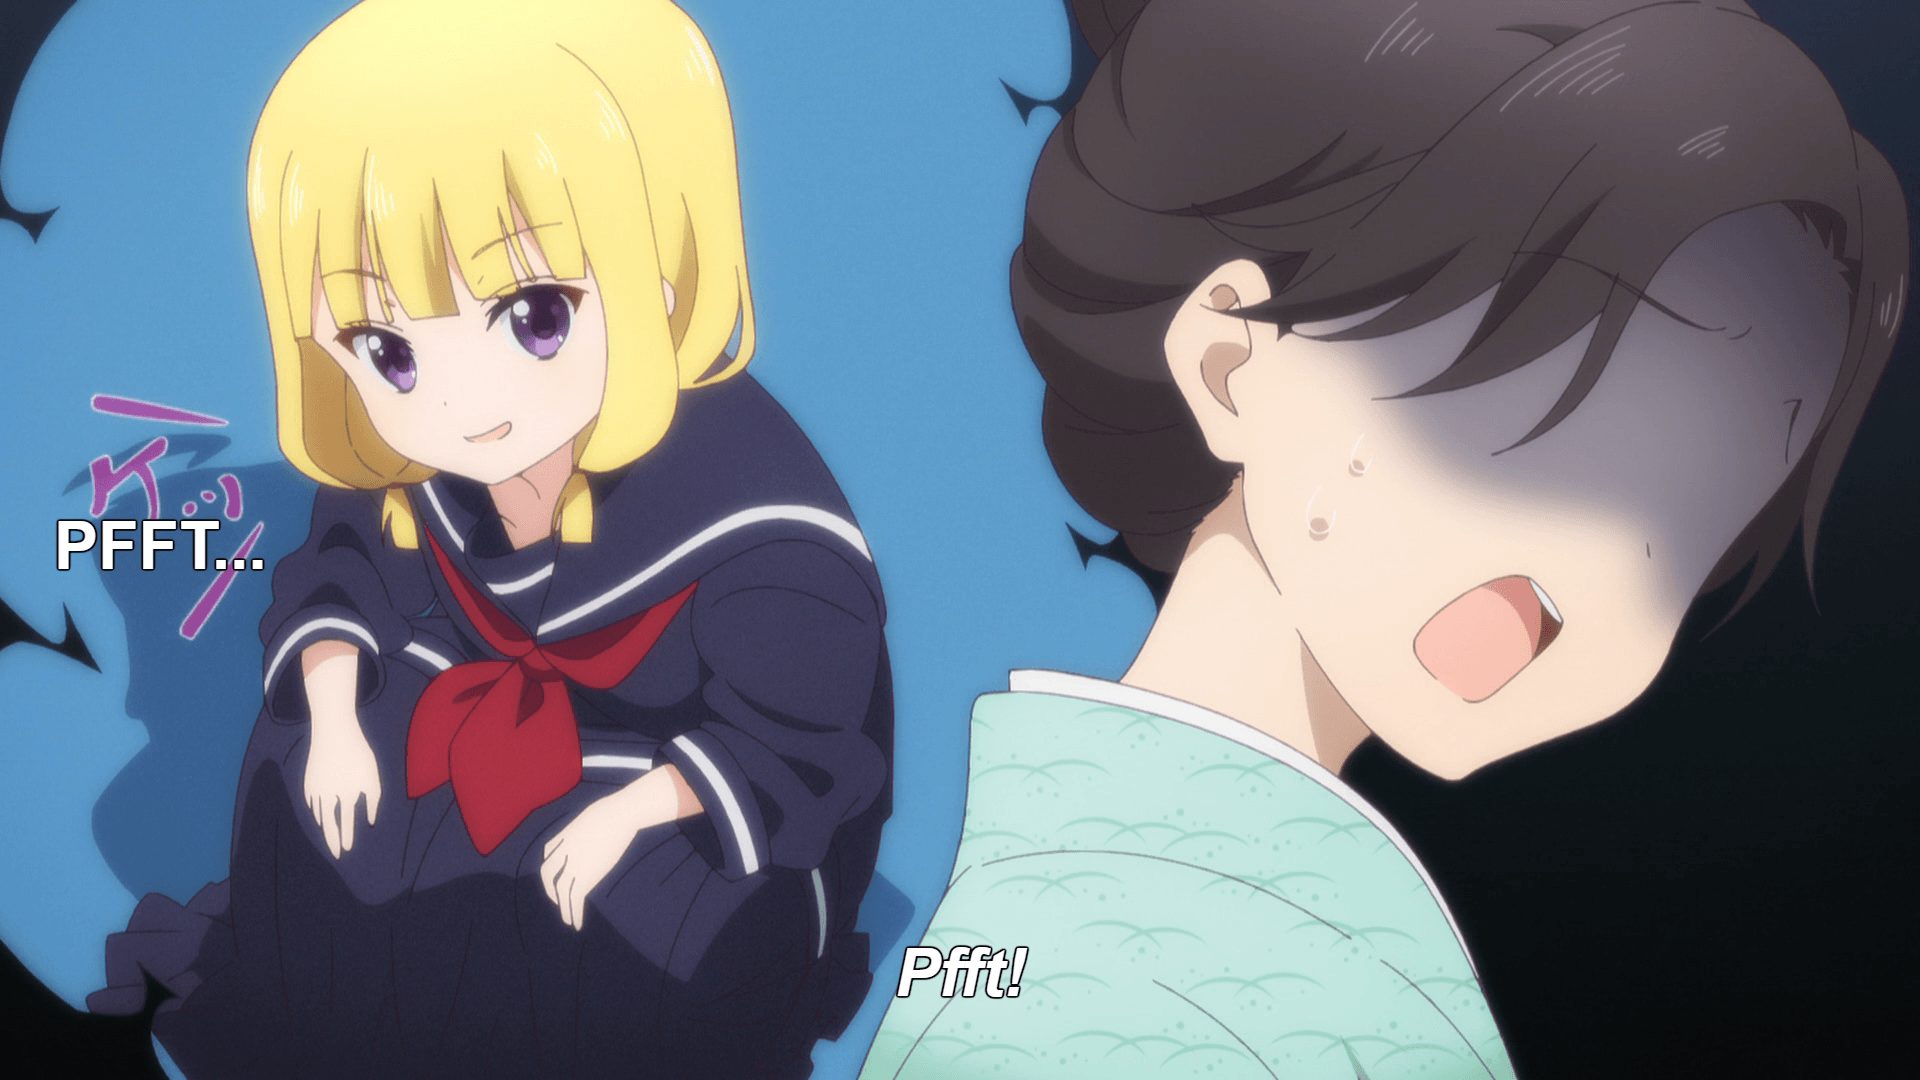 Spoilers Blend S 3 discussion